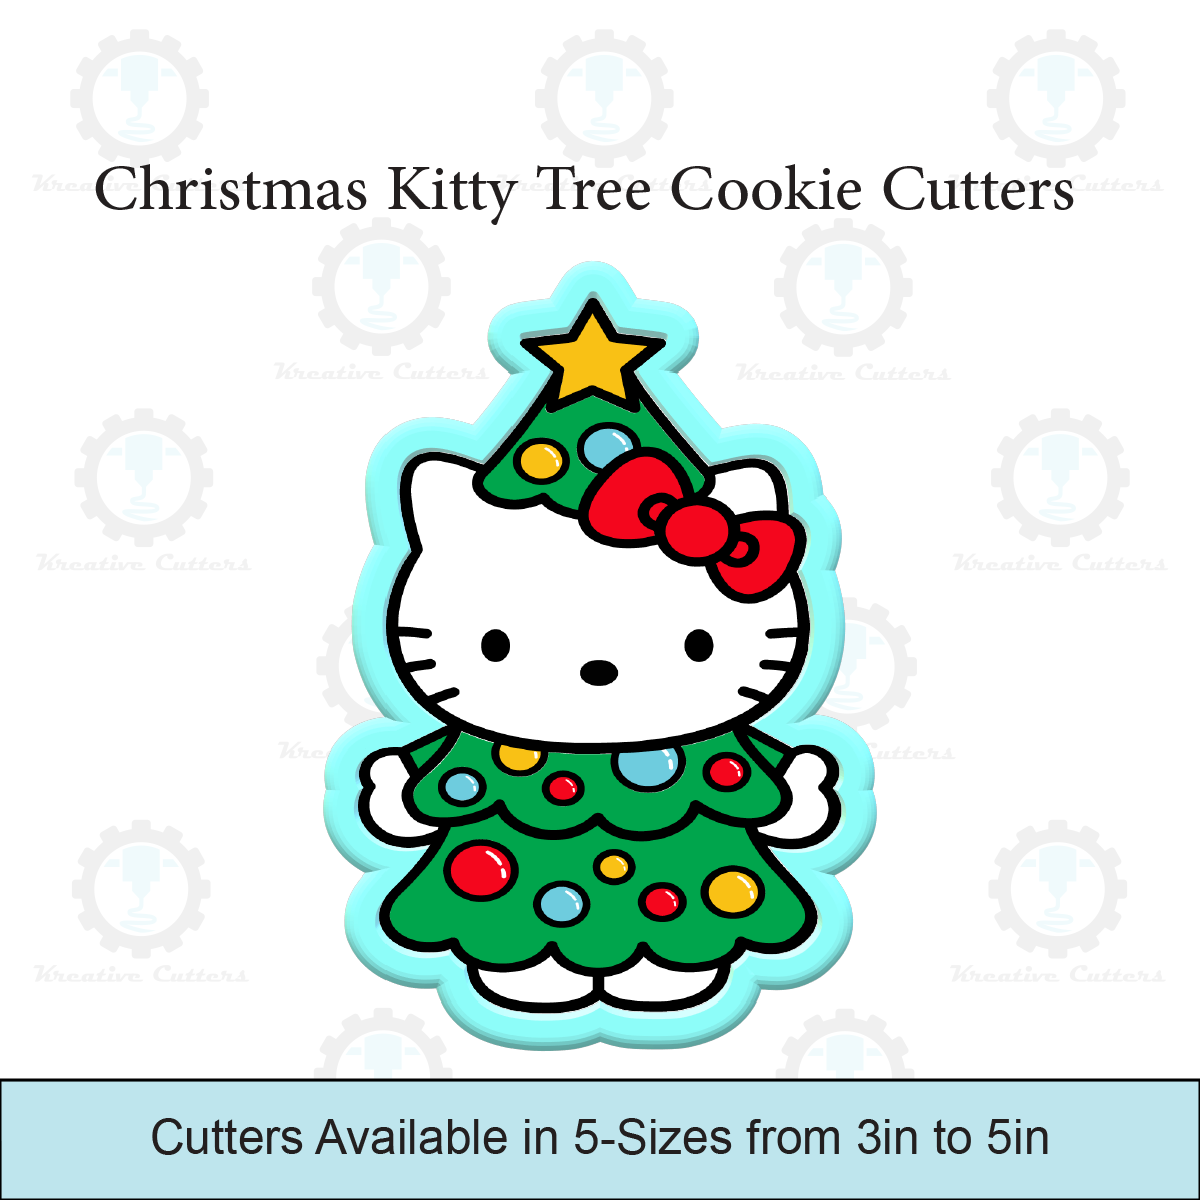 Christmas Kitty Tree Cookie Cutters